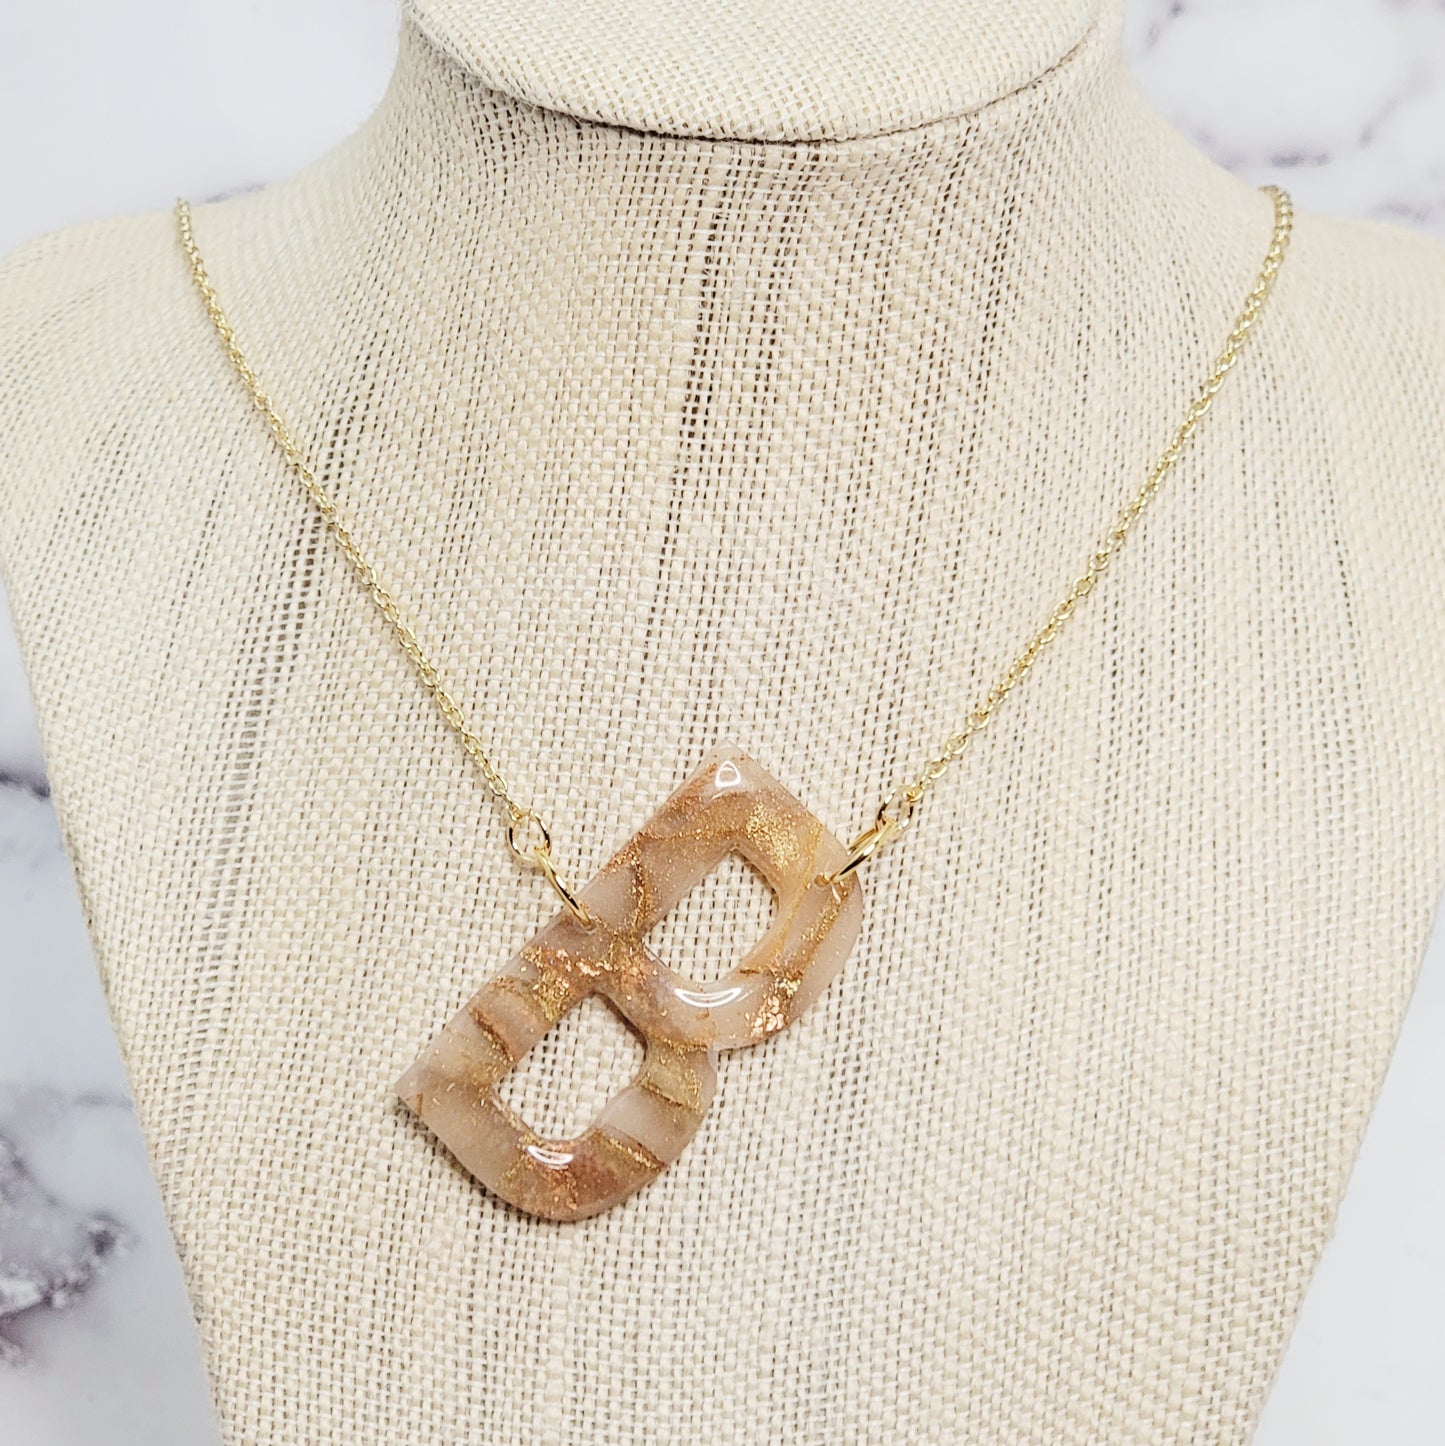 The Initial, Faux Stone Copper Necklace